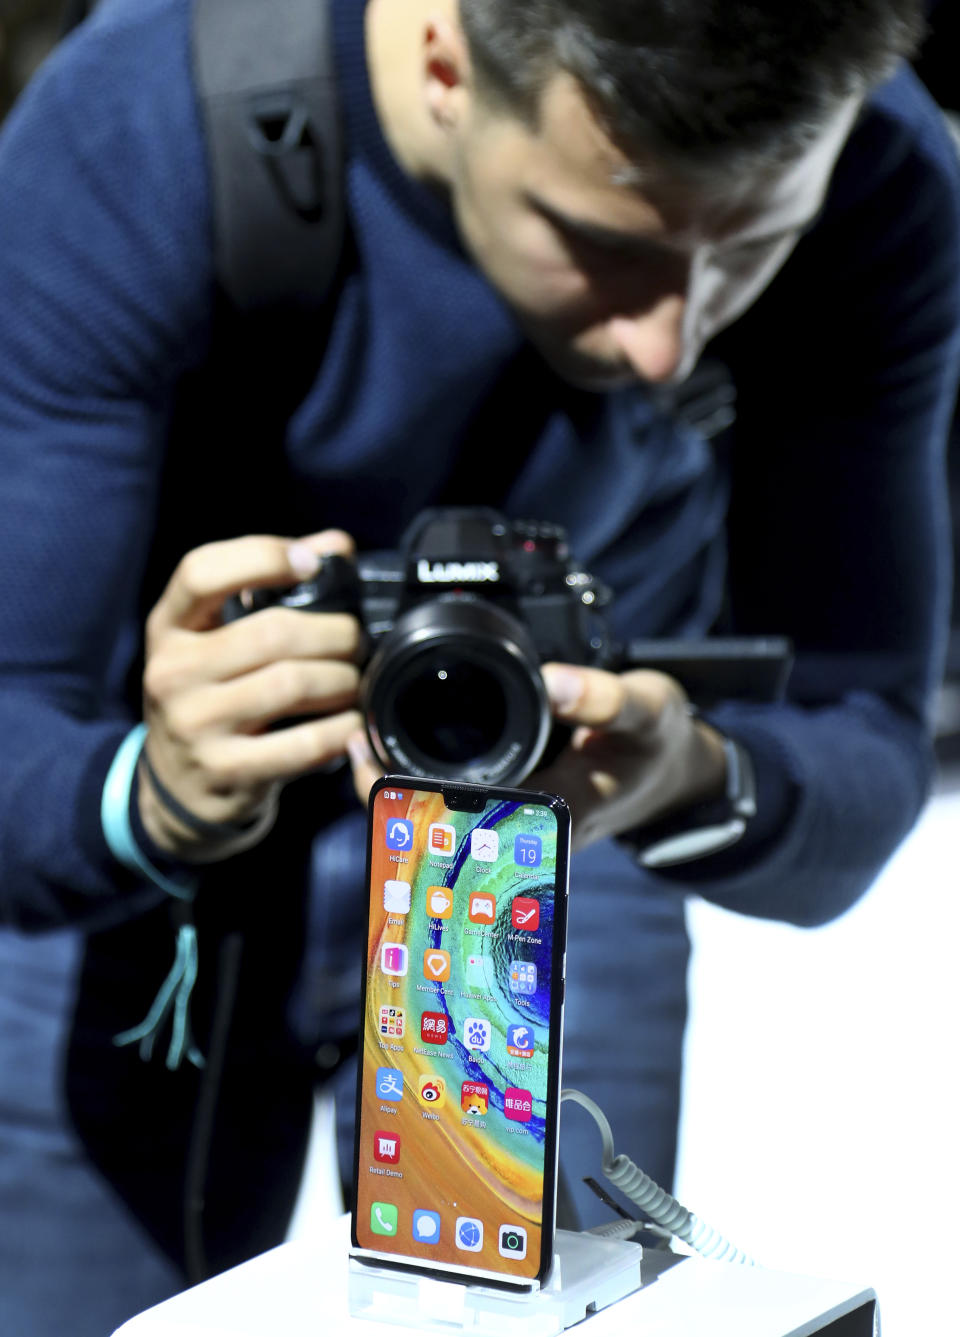 A man takes a picture of the new 'Huawei Mate 30' of China's smartphone manufacturer Huawei during an event in Munich, Germany, Thursday, Sept. 19, 2019. (AP Photo/Matthias Schrader)